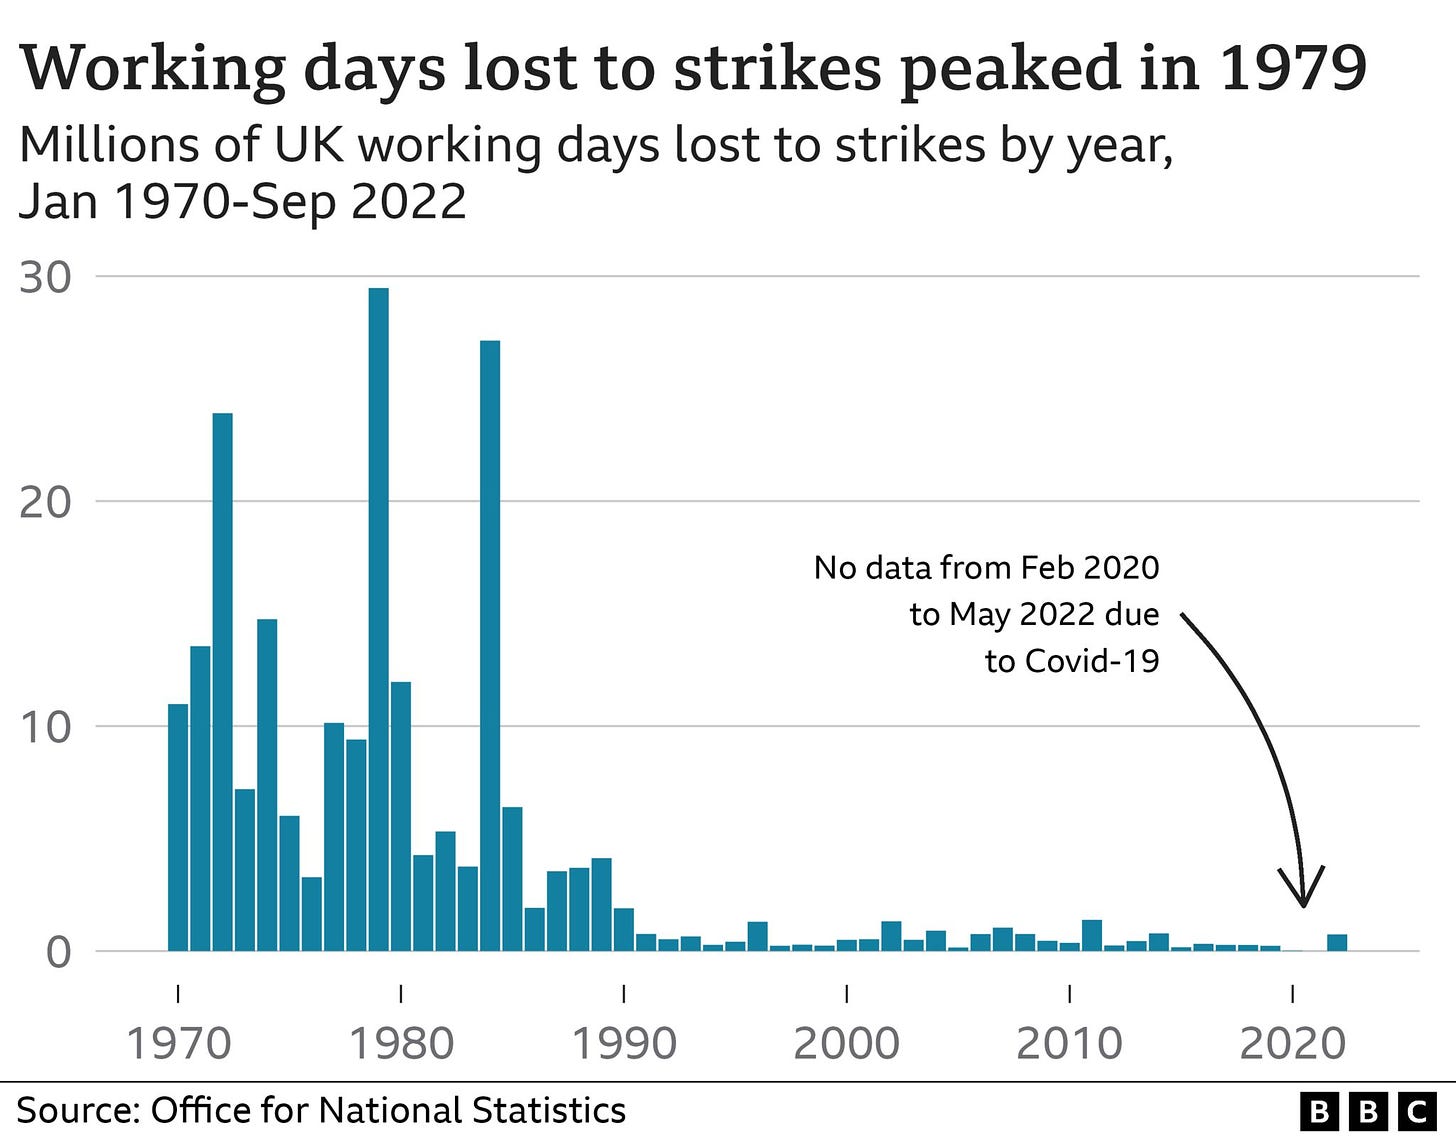 Chart showing days lost to strikes between 1970 to September 2022. It shows strike days peaking in 1979.